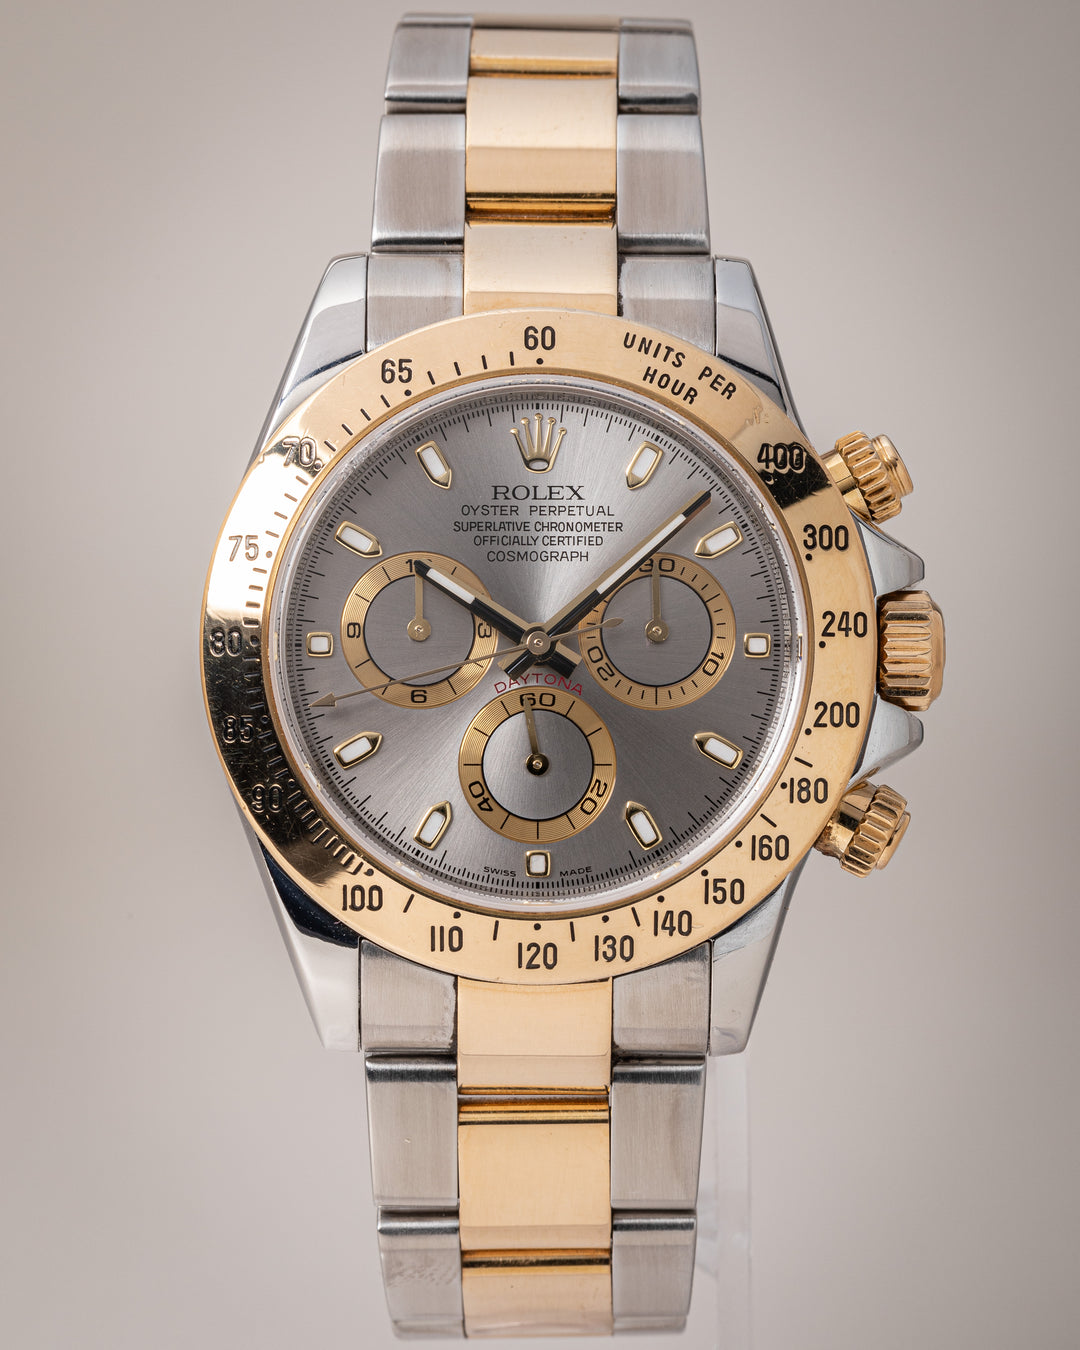 Rolex Stainless Steel and 18k Yellow Gold Cosmograph Daytona (116523)